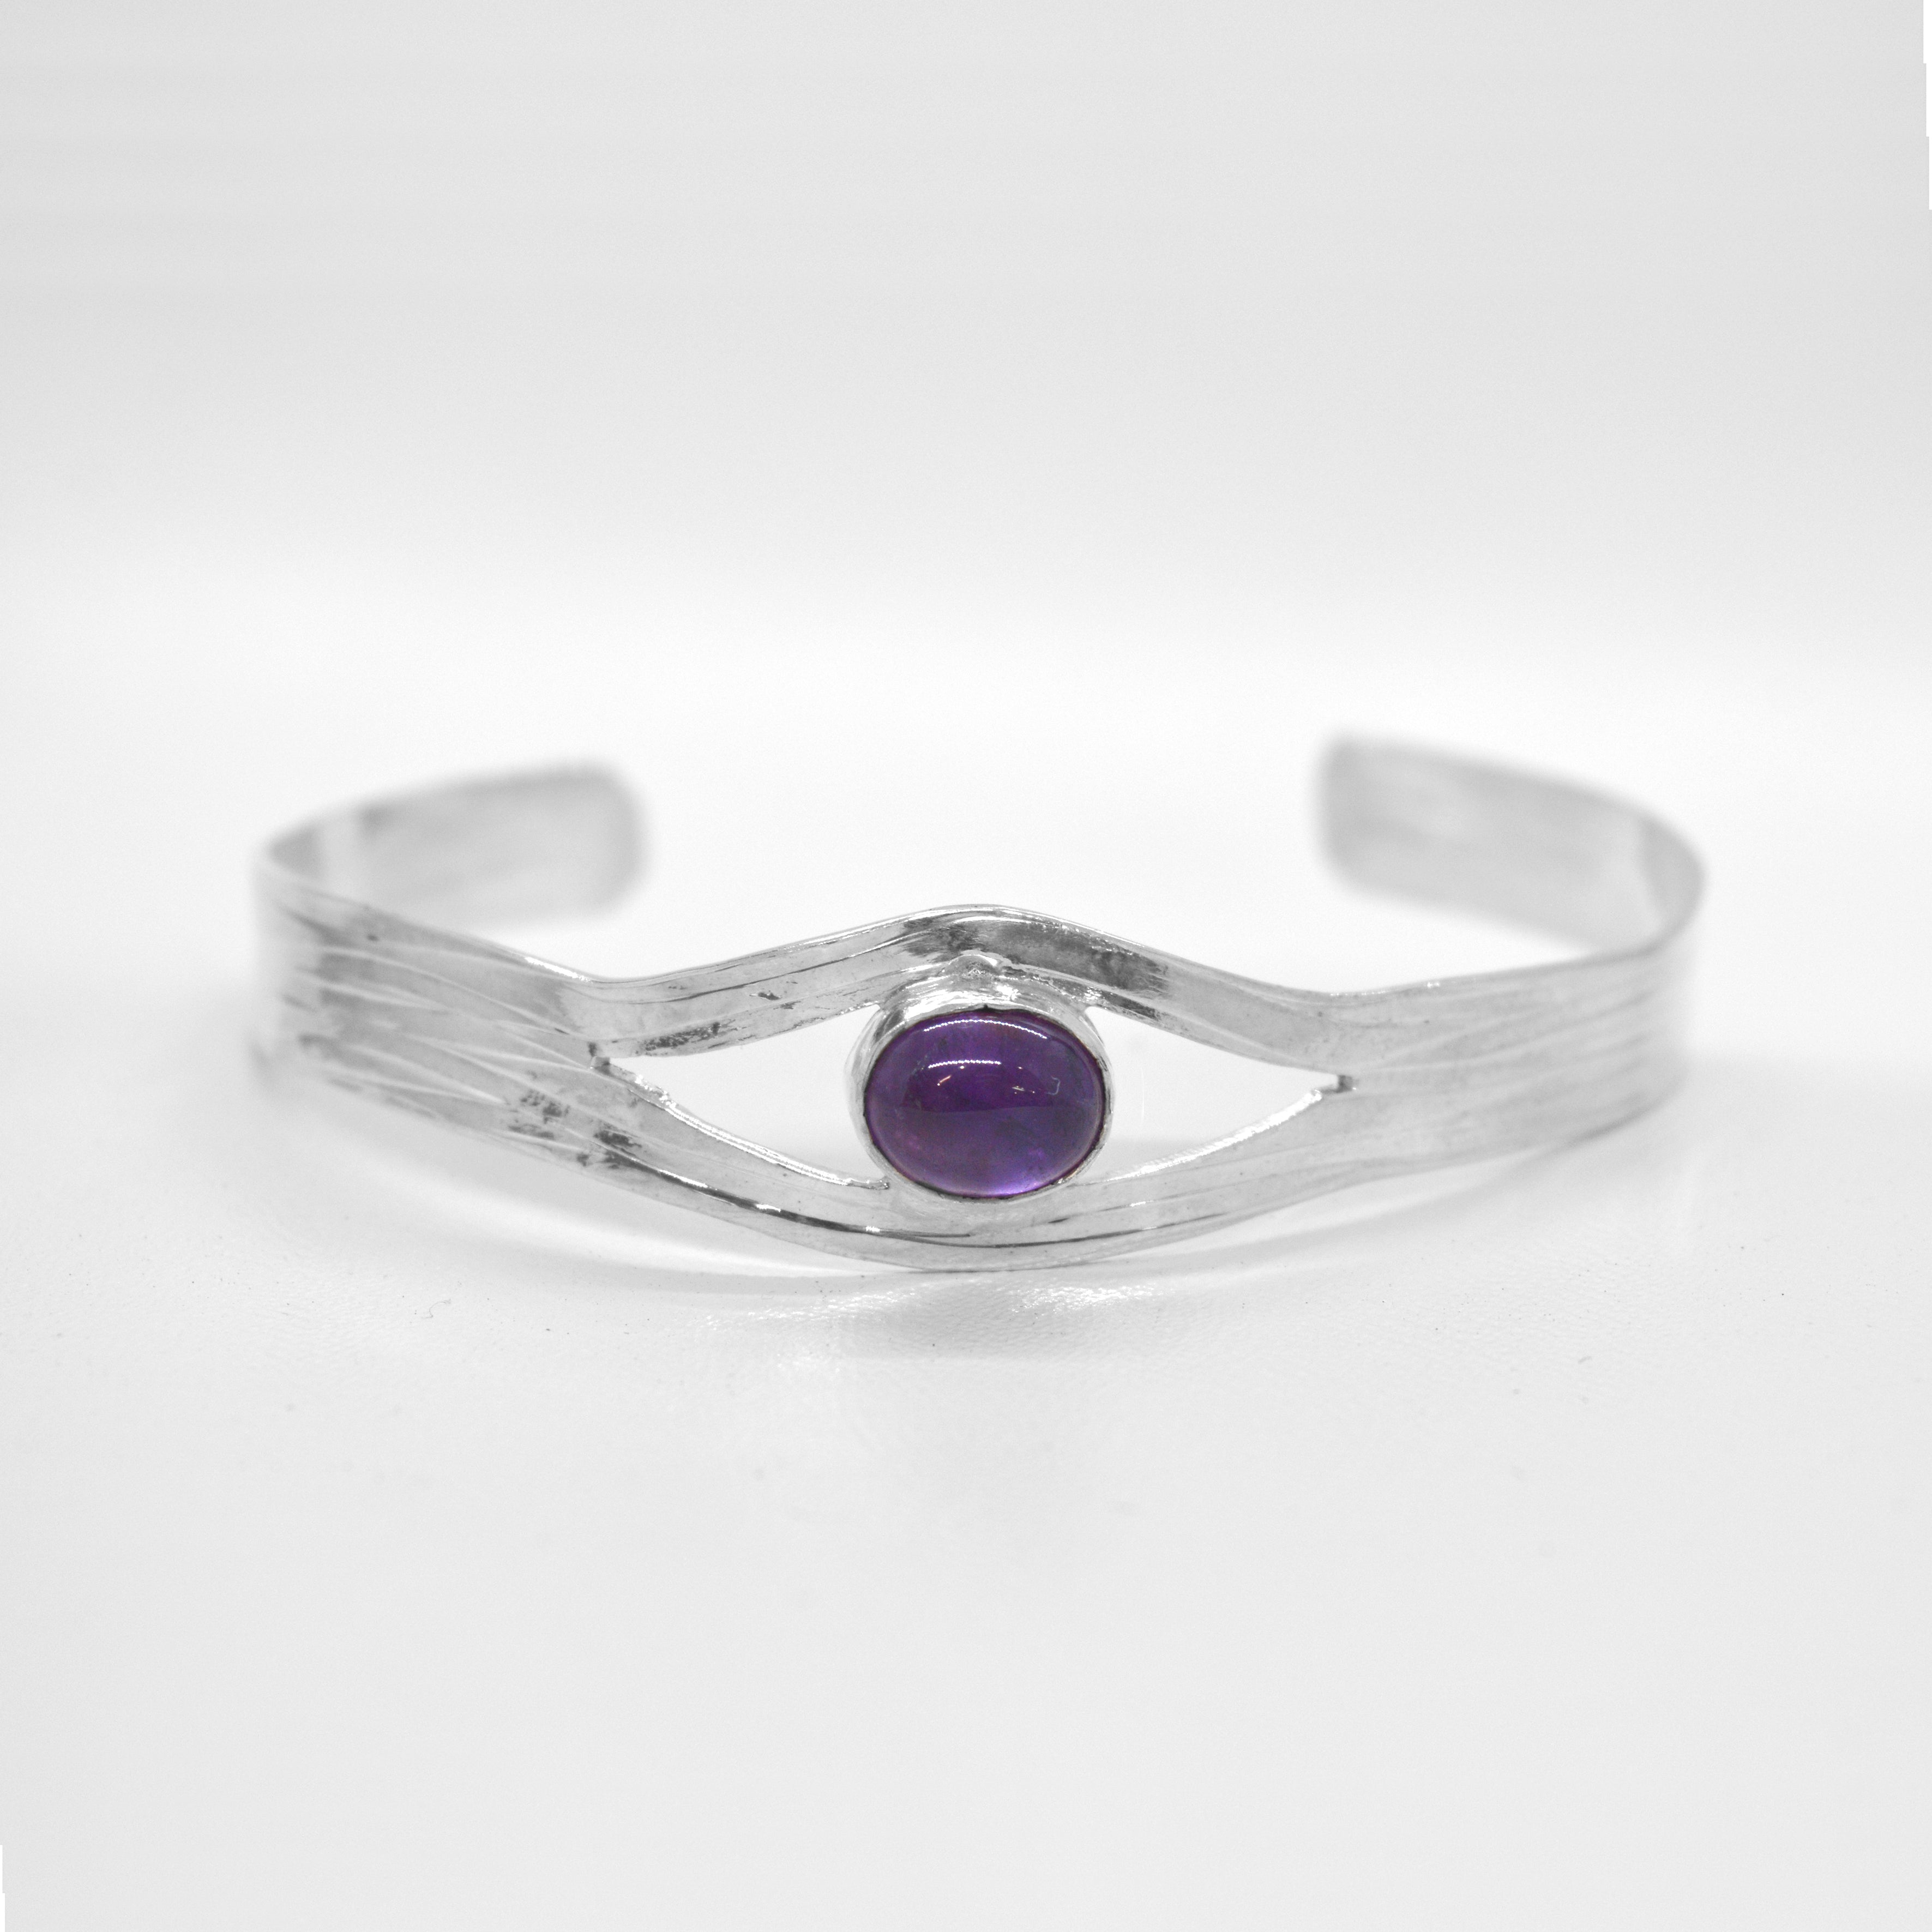 Cuff Bracelet with Amethyst(sold but backorder available)